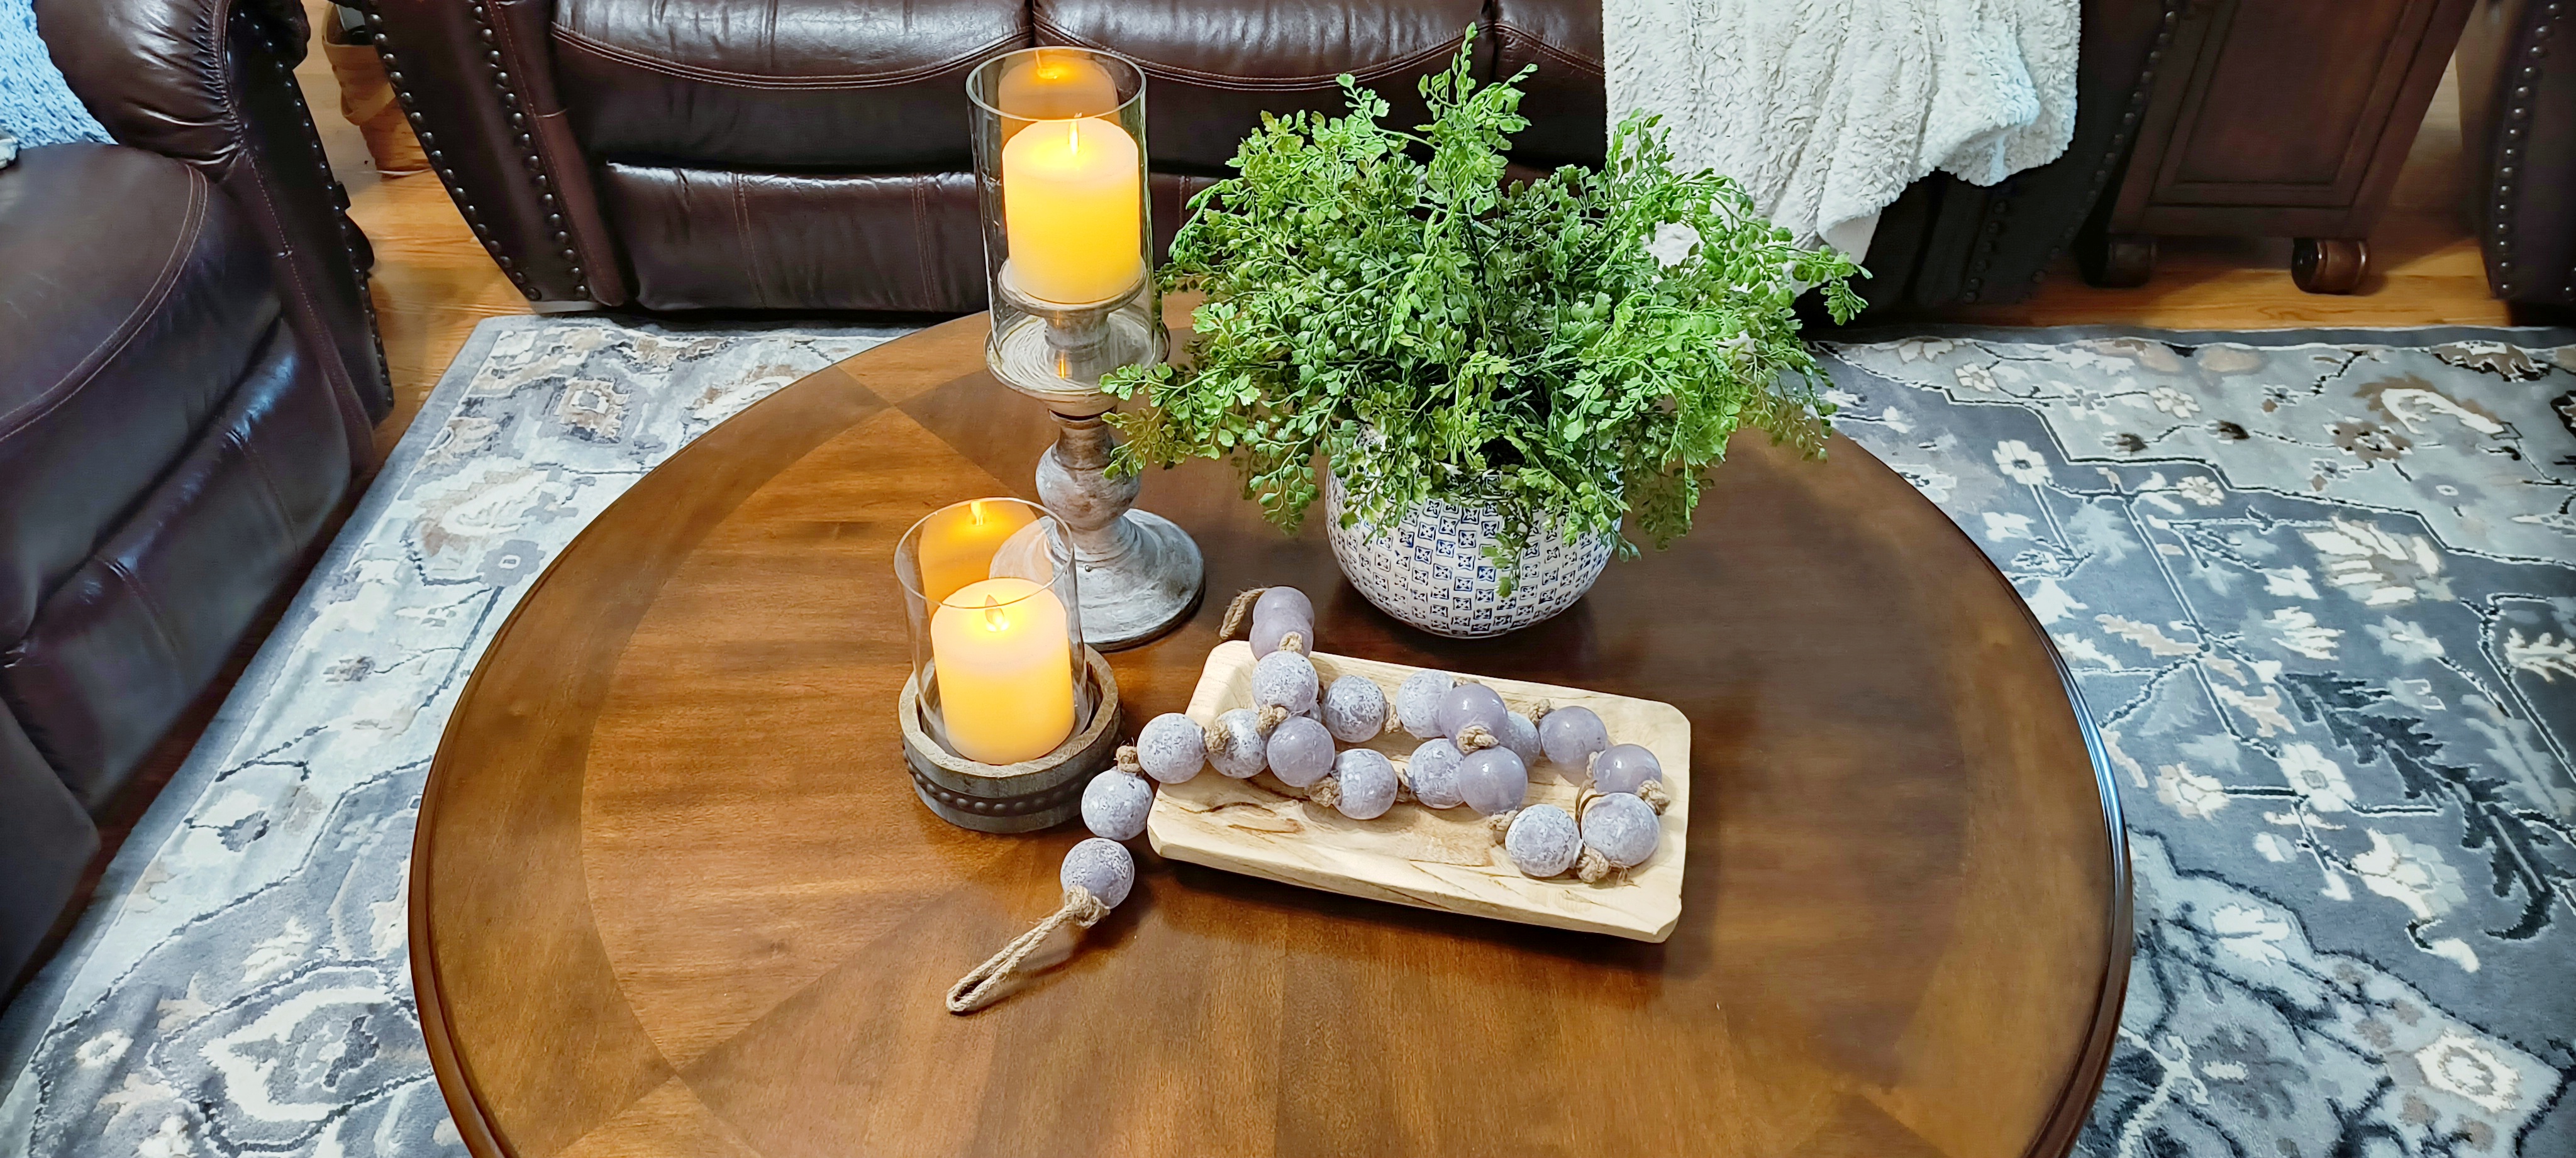 7 ways to style your coffee table to look great in your living area —  IsoKing